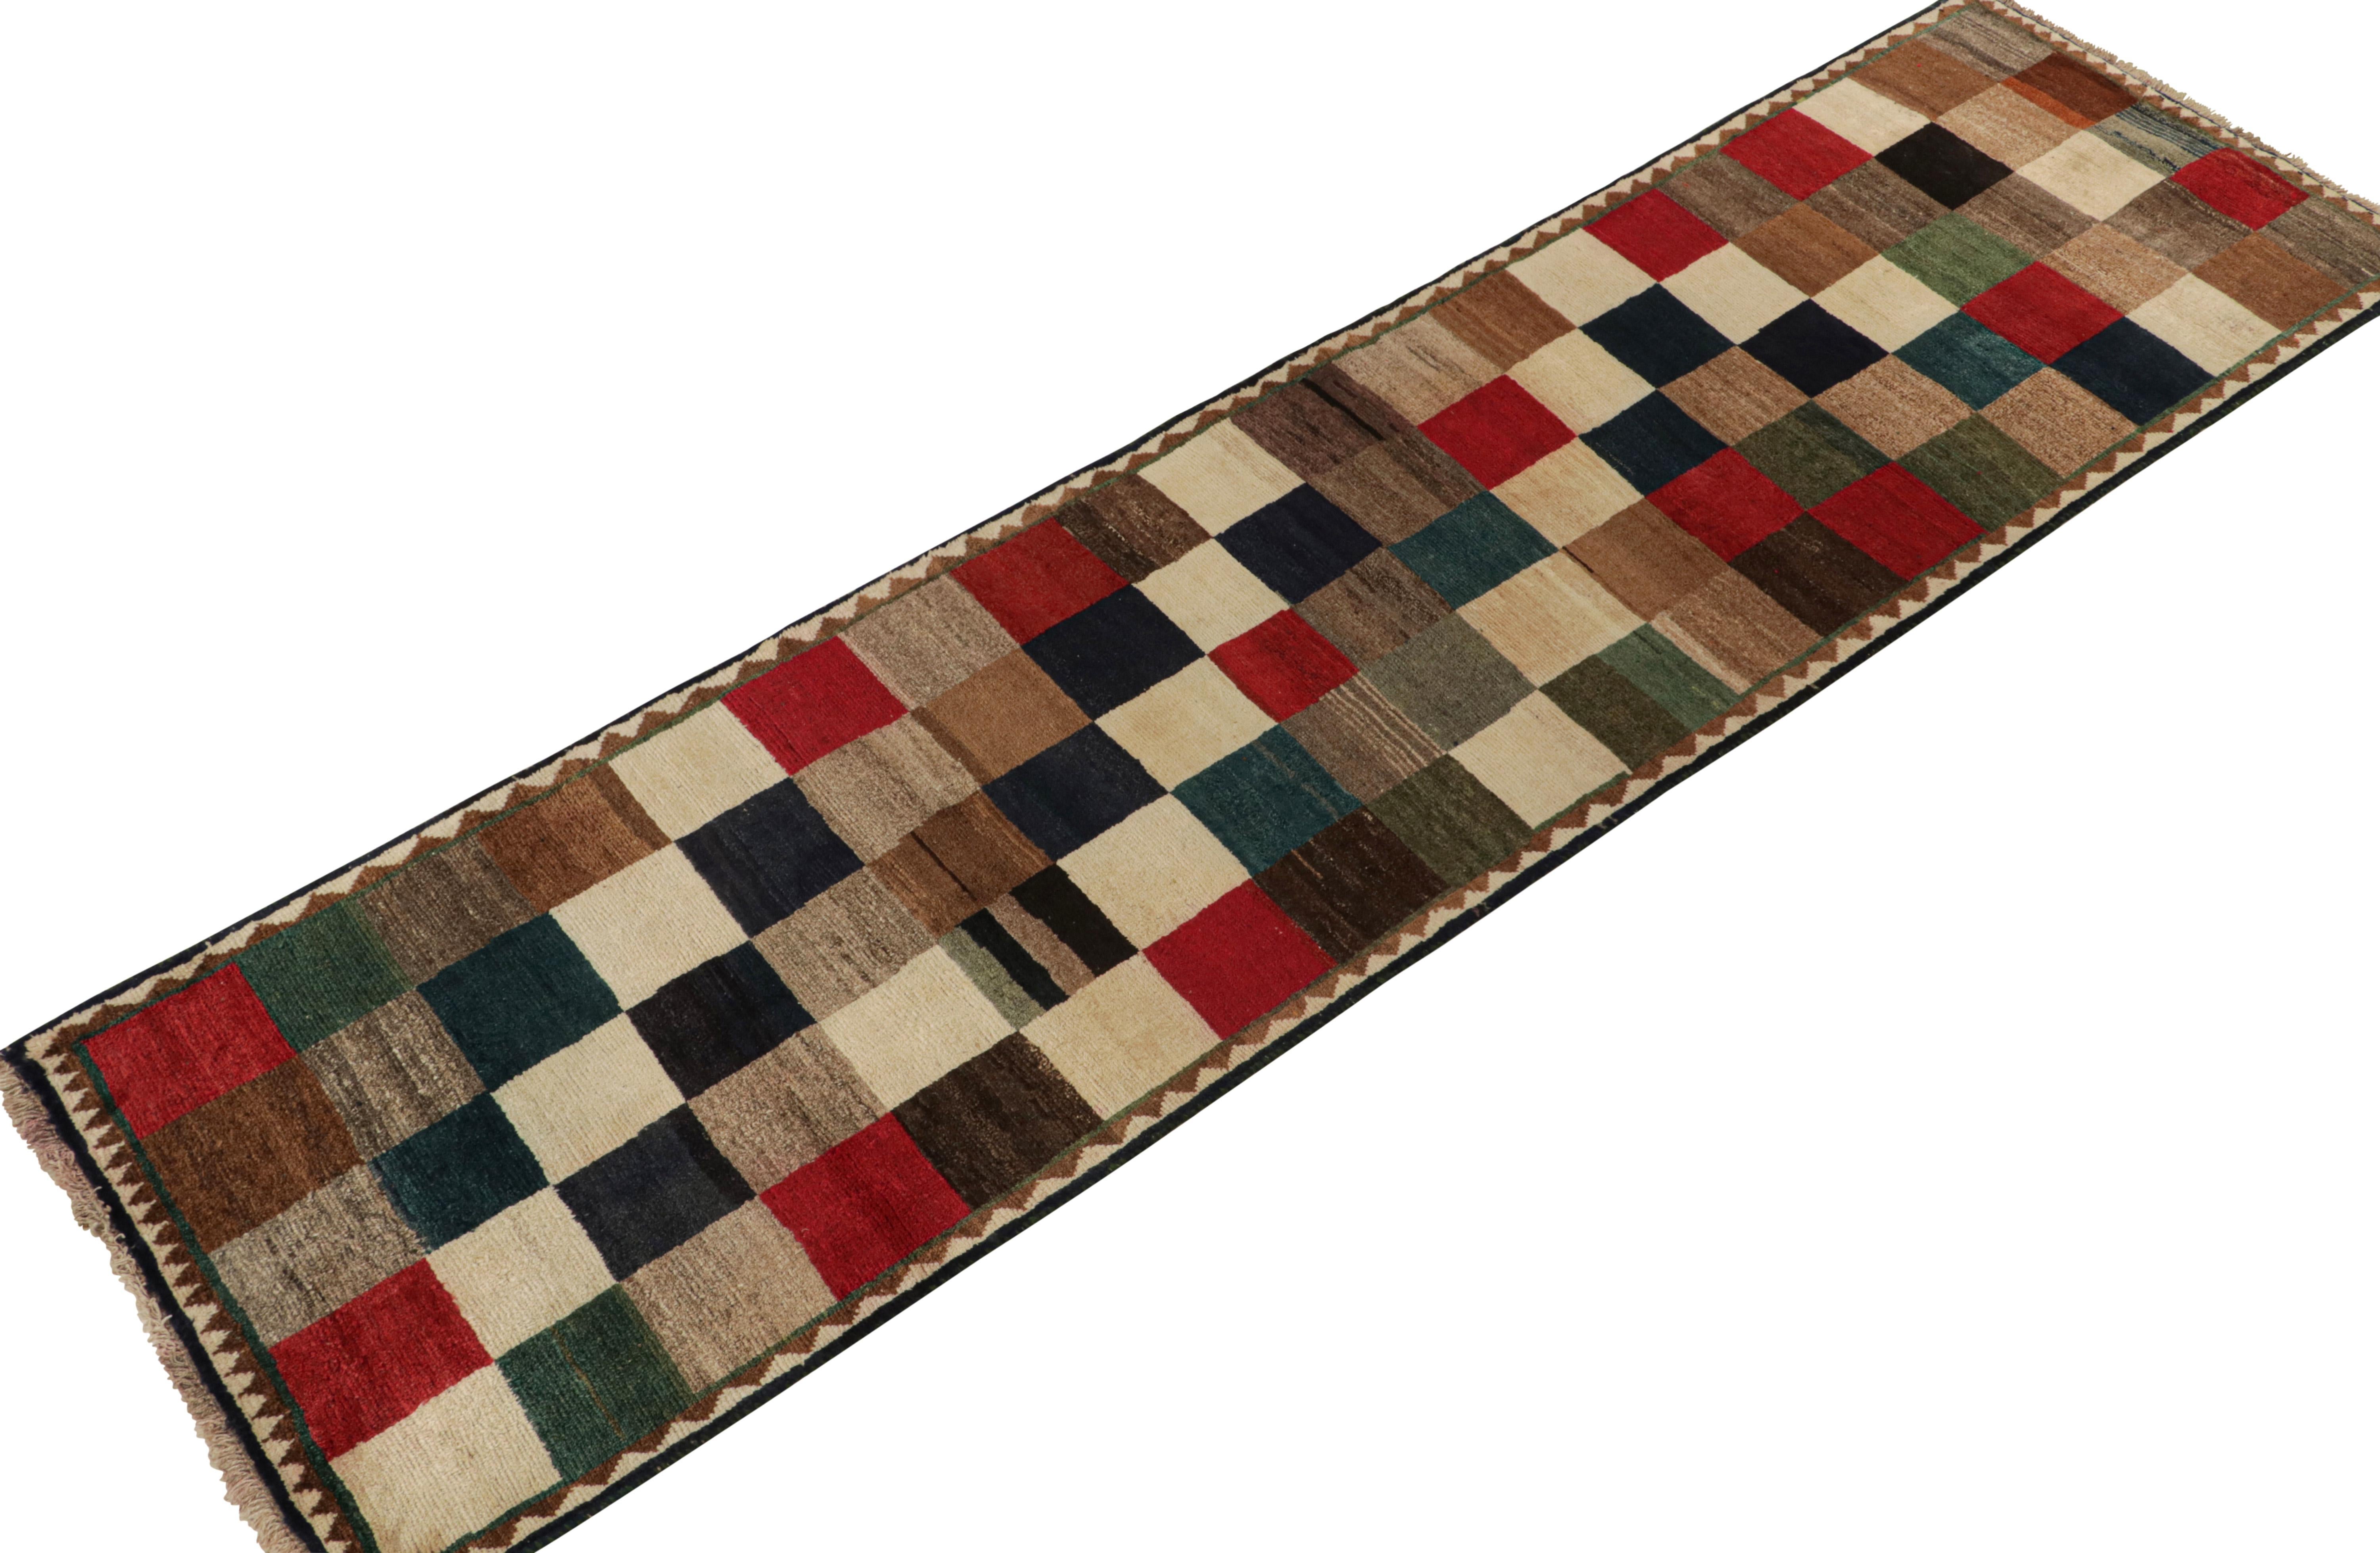 This vintage 3x11 Gabbeh Persian rug is from the latest entries in Rug & Kilim’s rare tribal curations. Hand-knotted in wool circa 1950-1960.
On the Design:
This tribal provenance is one of the most primitive, and collectible shabby-chic styles in